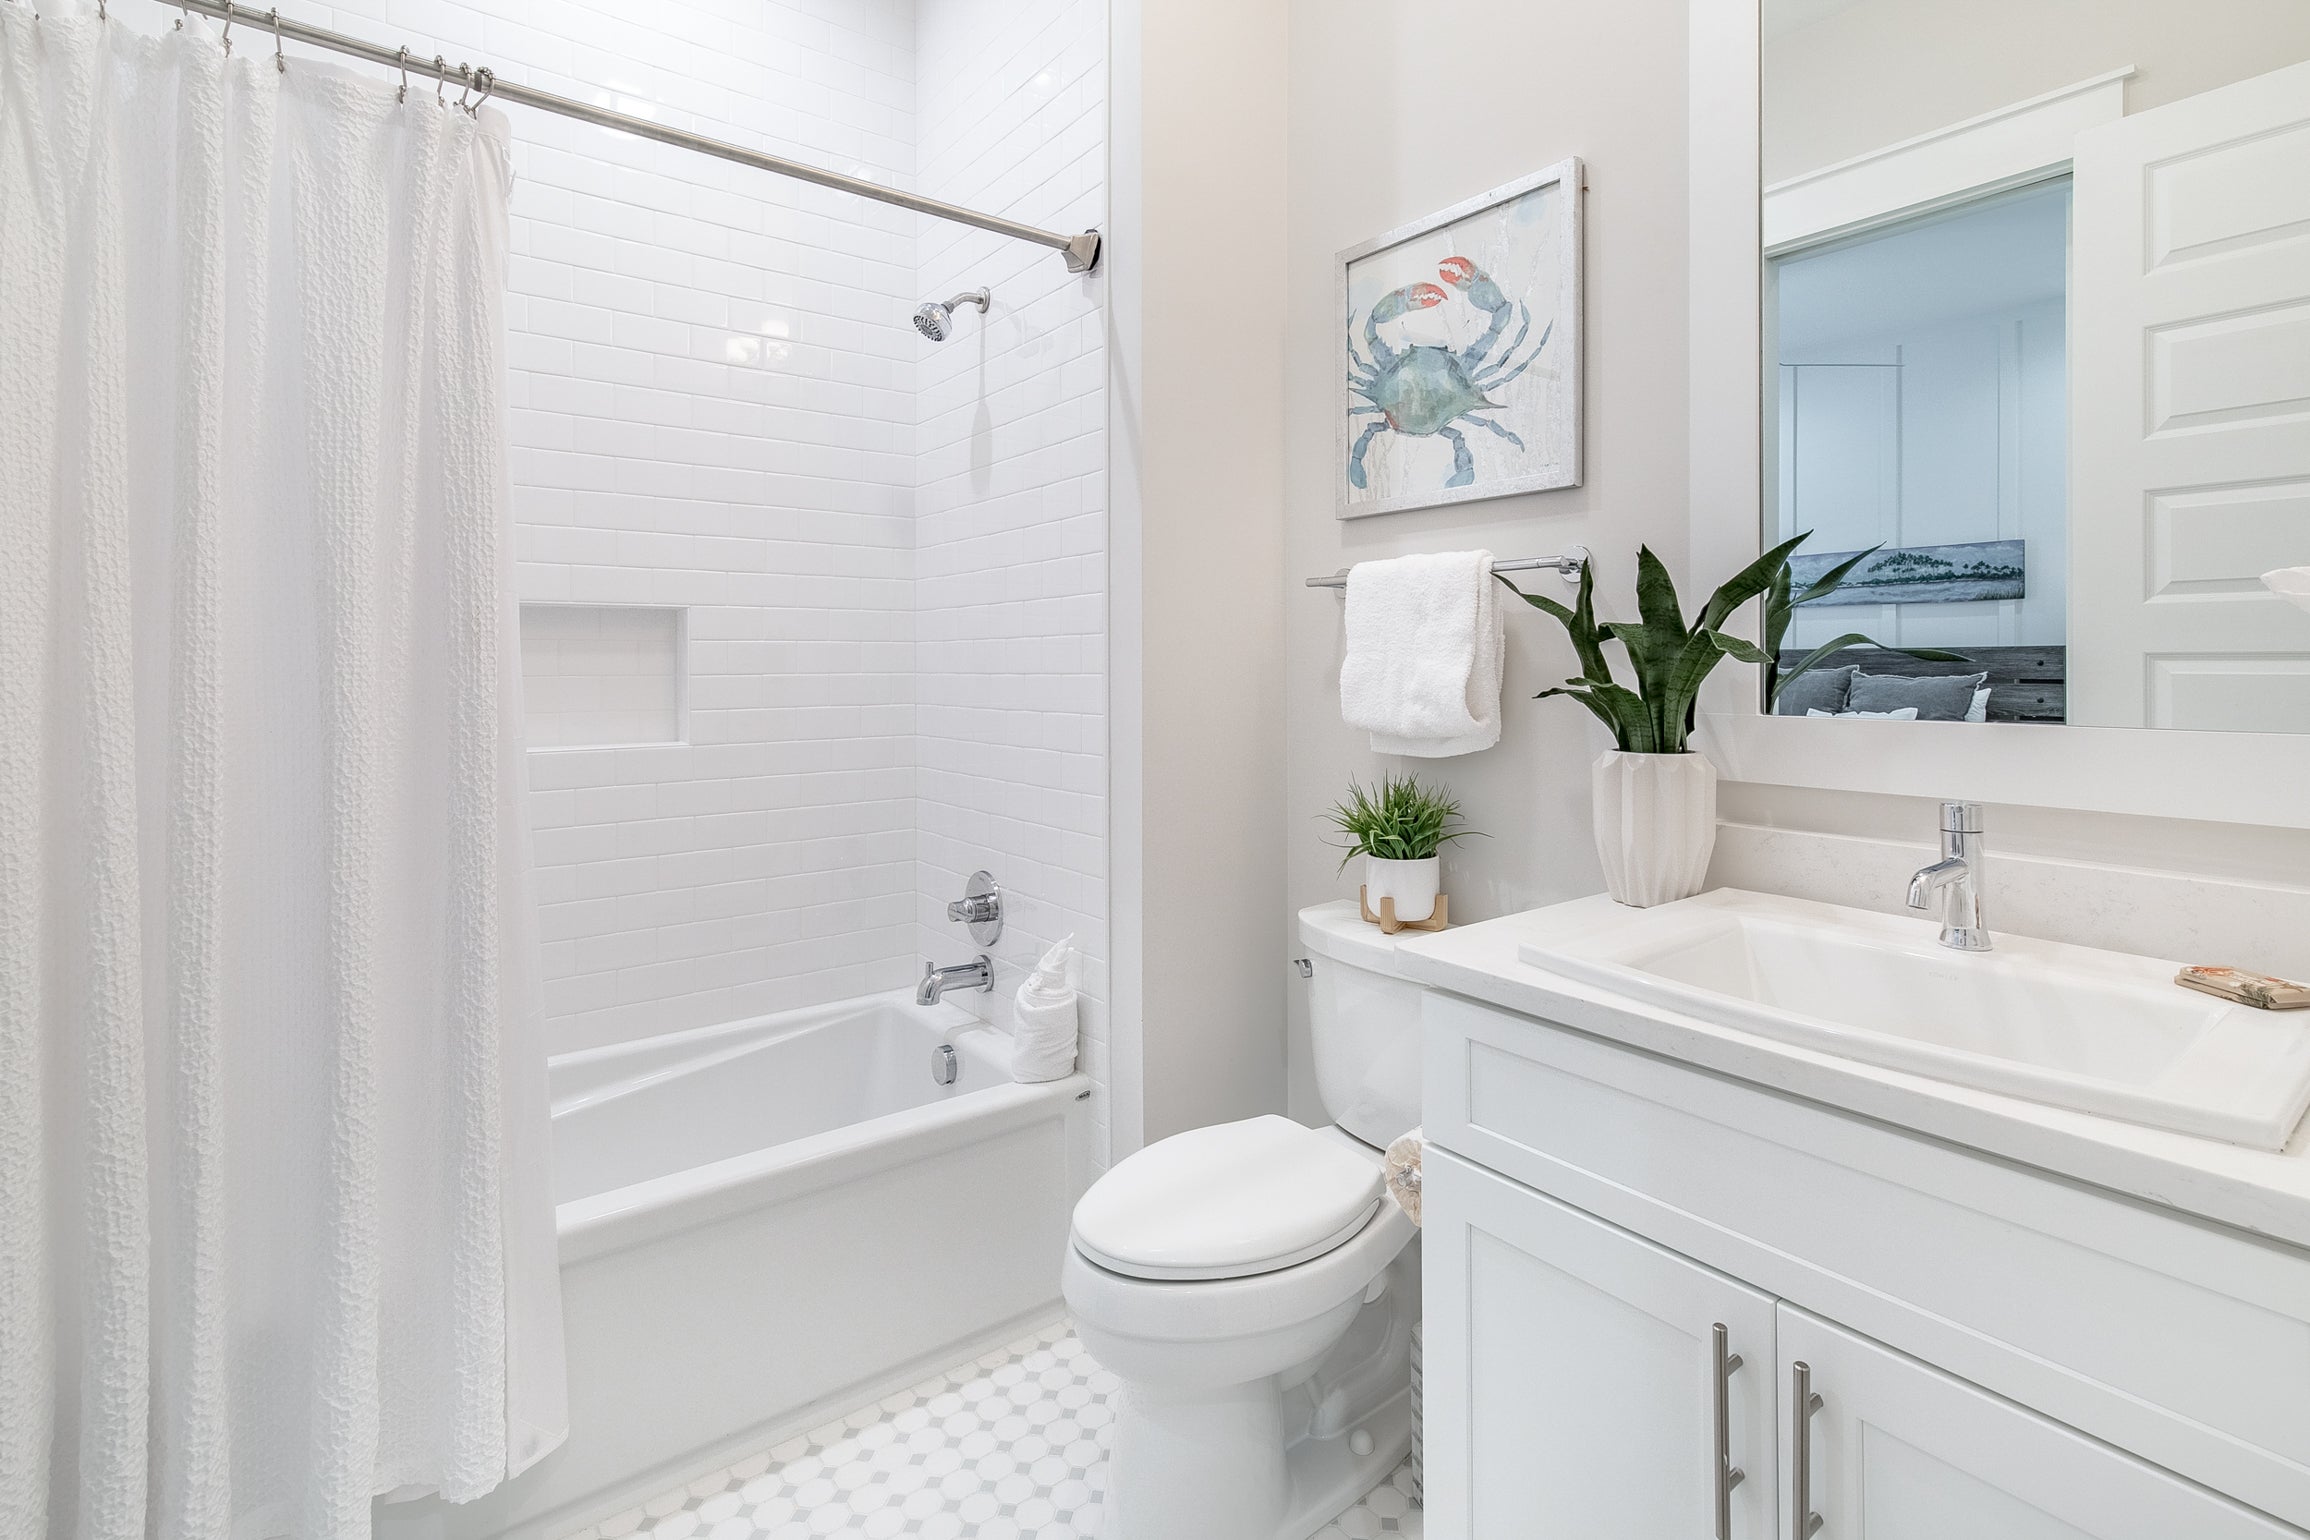 Full guest bath with shower-tub combo